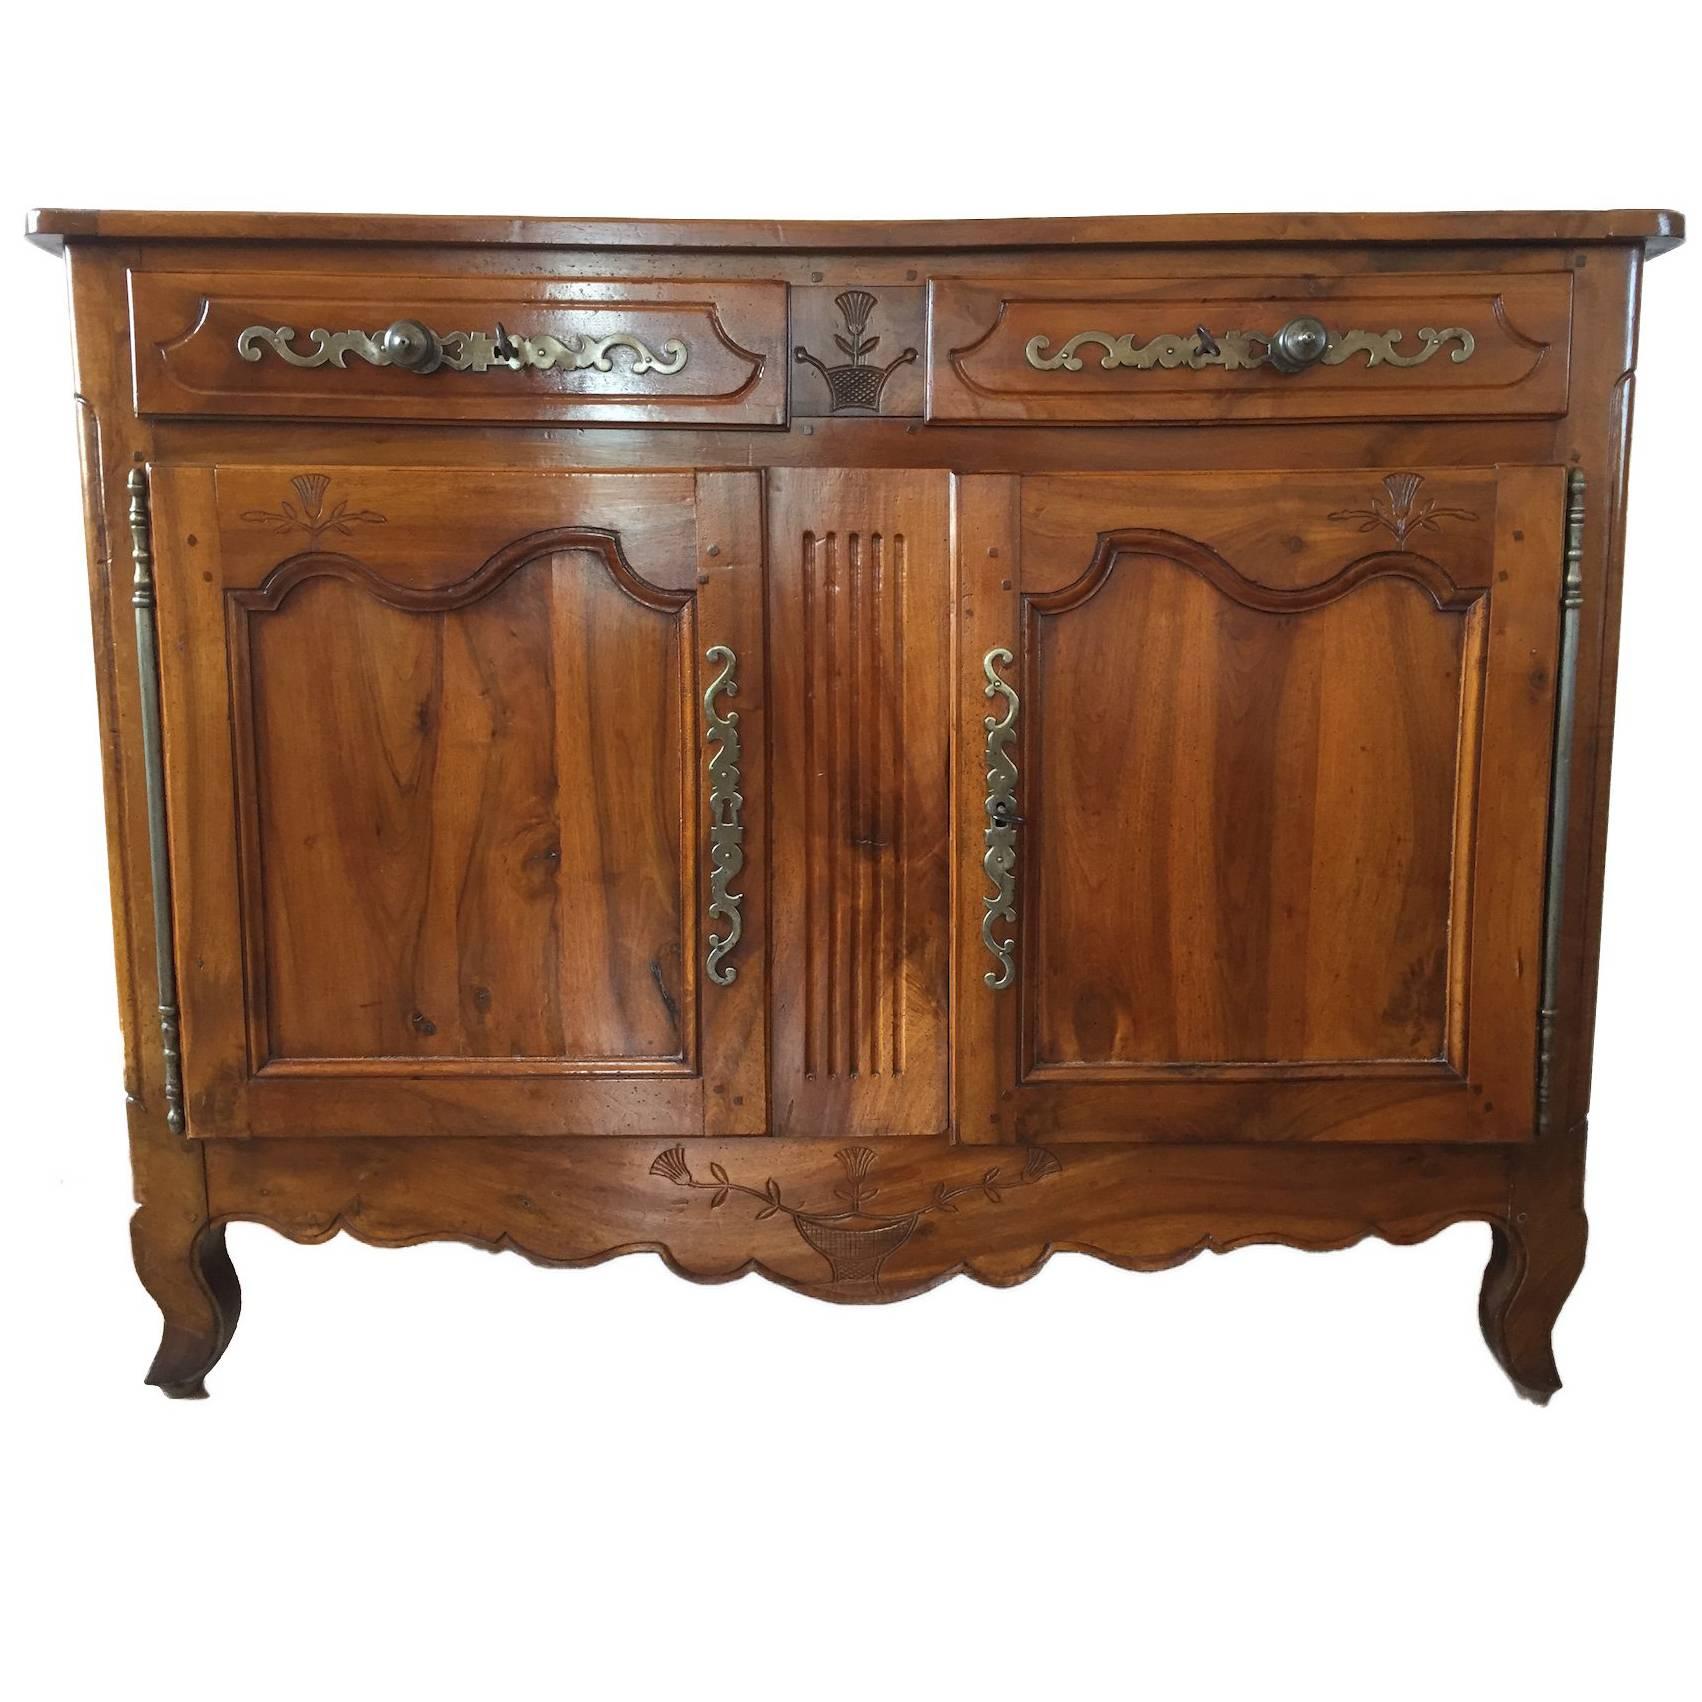 French Country Sideboard, Early 1800